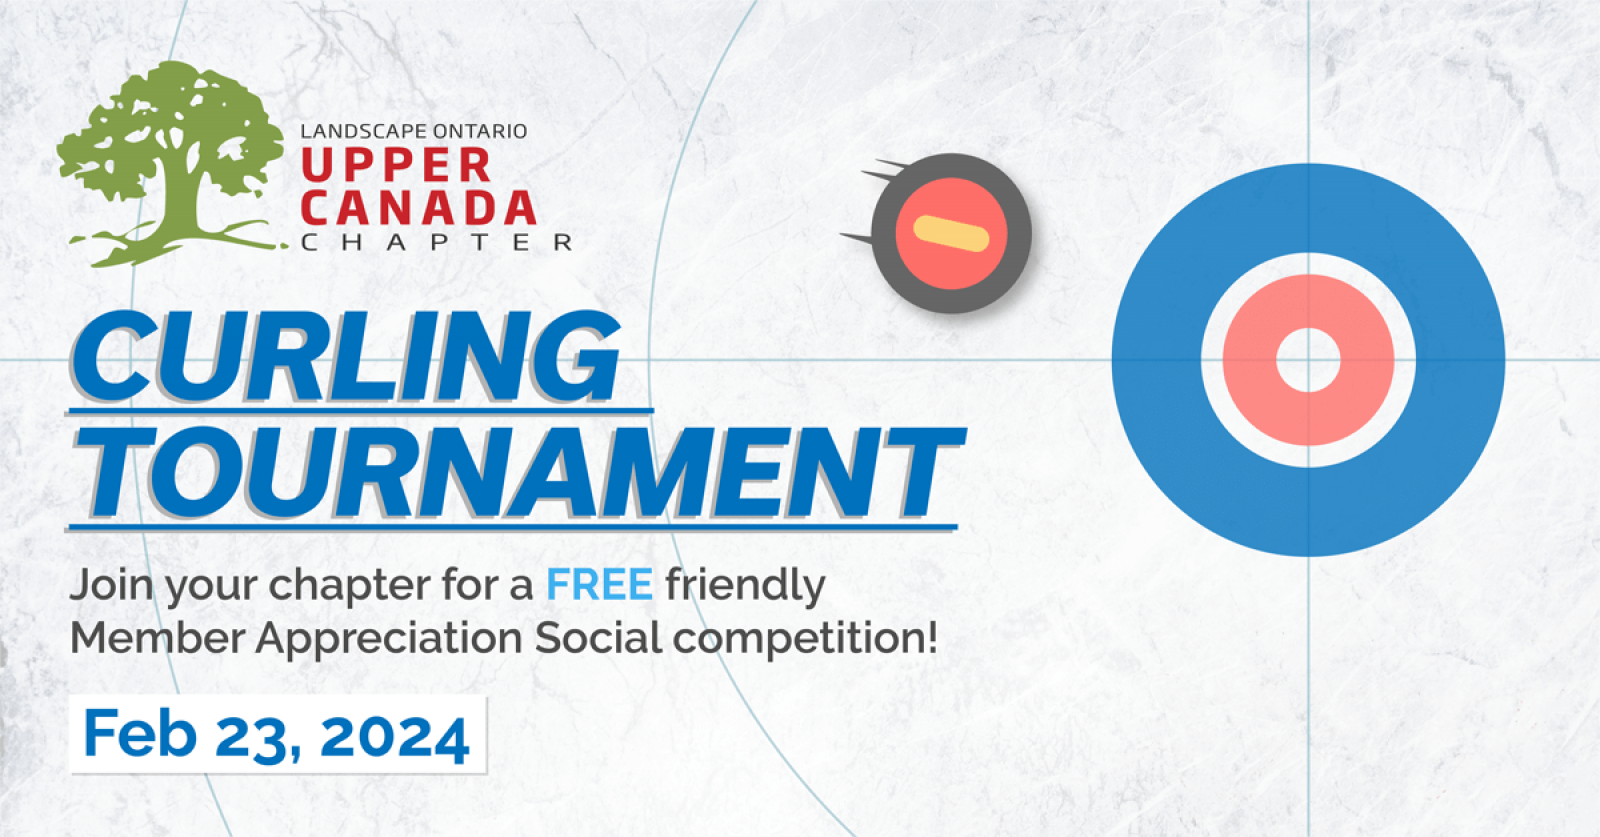 Upper Canada Chapter Curling Tournament 2024